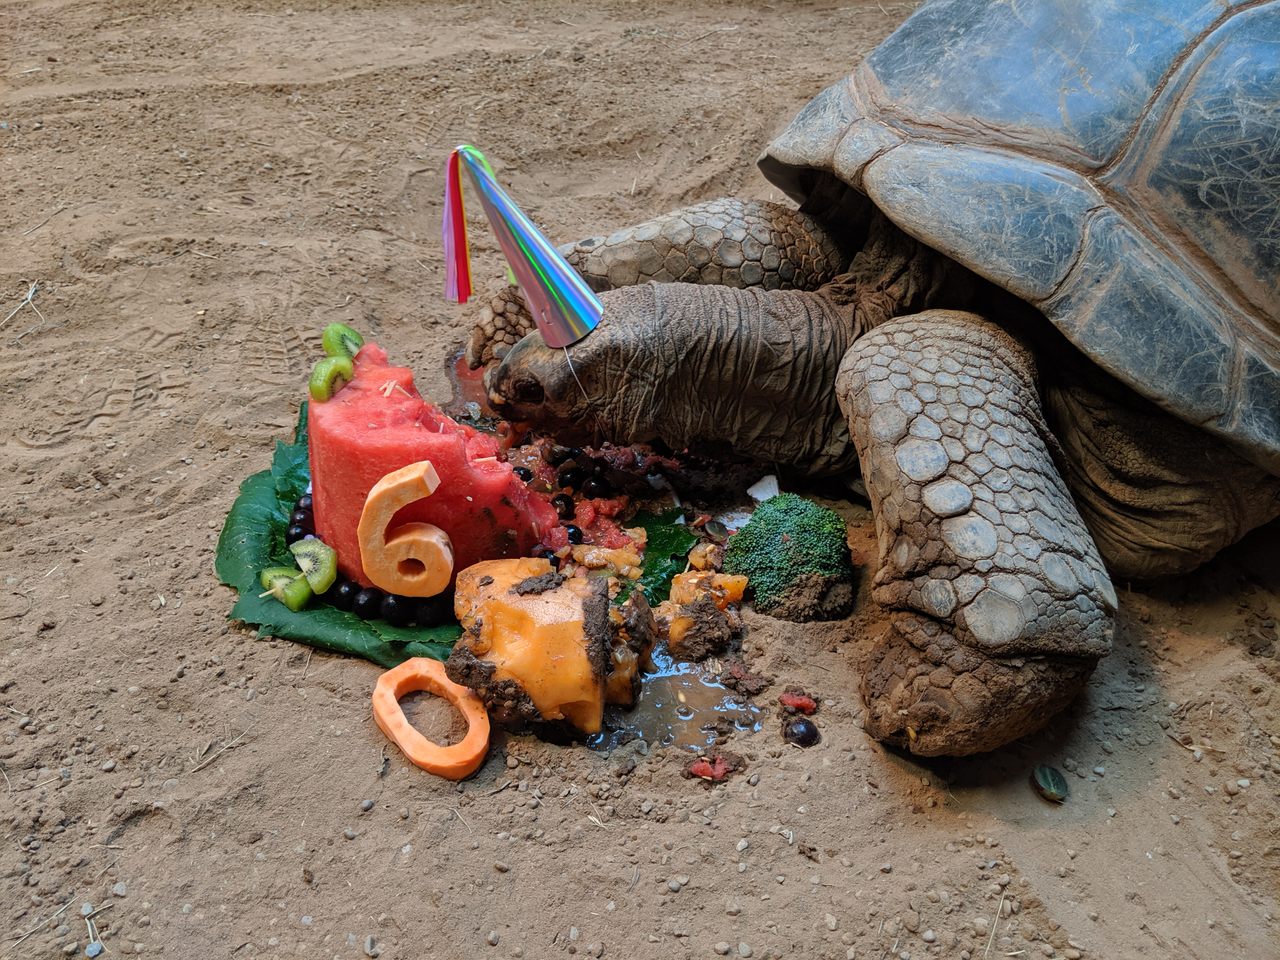 Henry, an Aldabra tortoise, demolished a fruit-and-veggie cake for his 60th birthday.